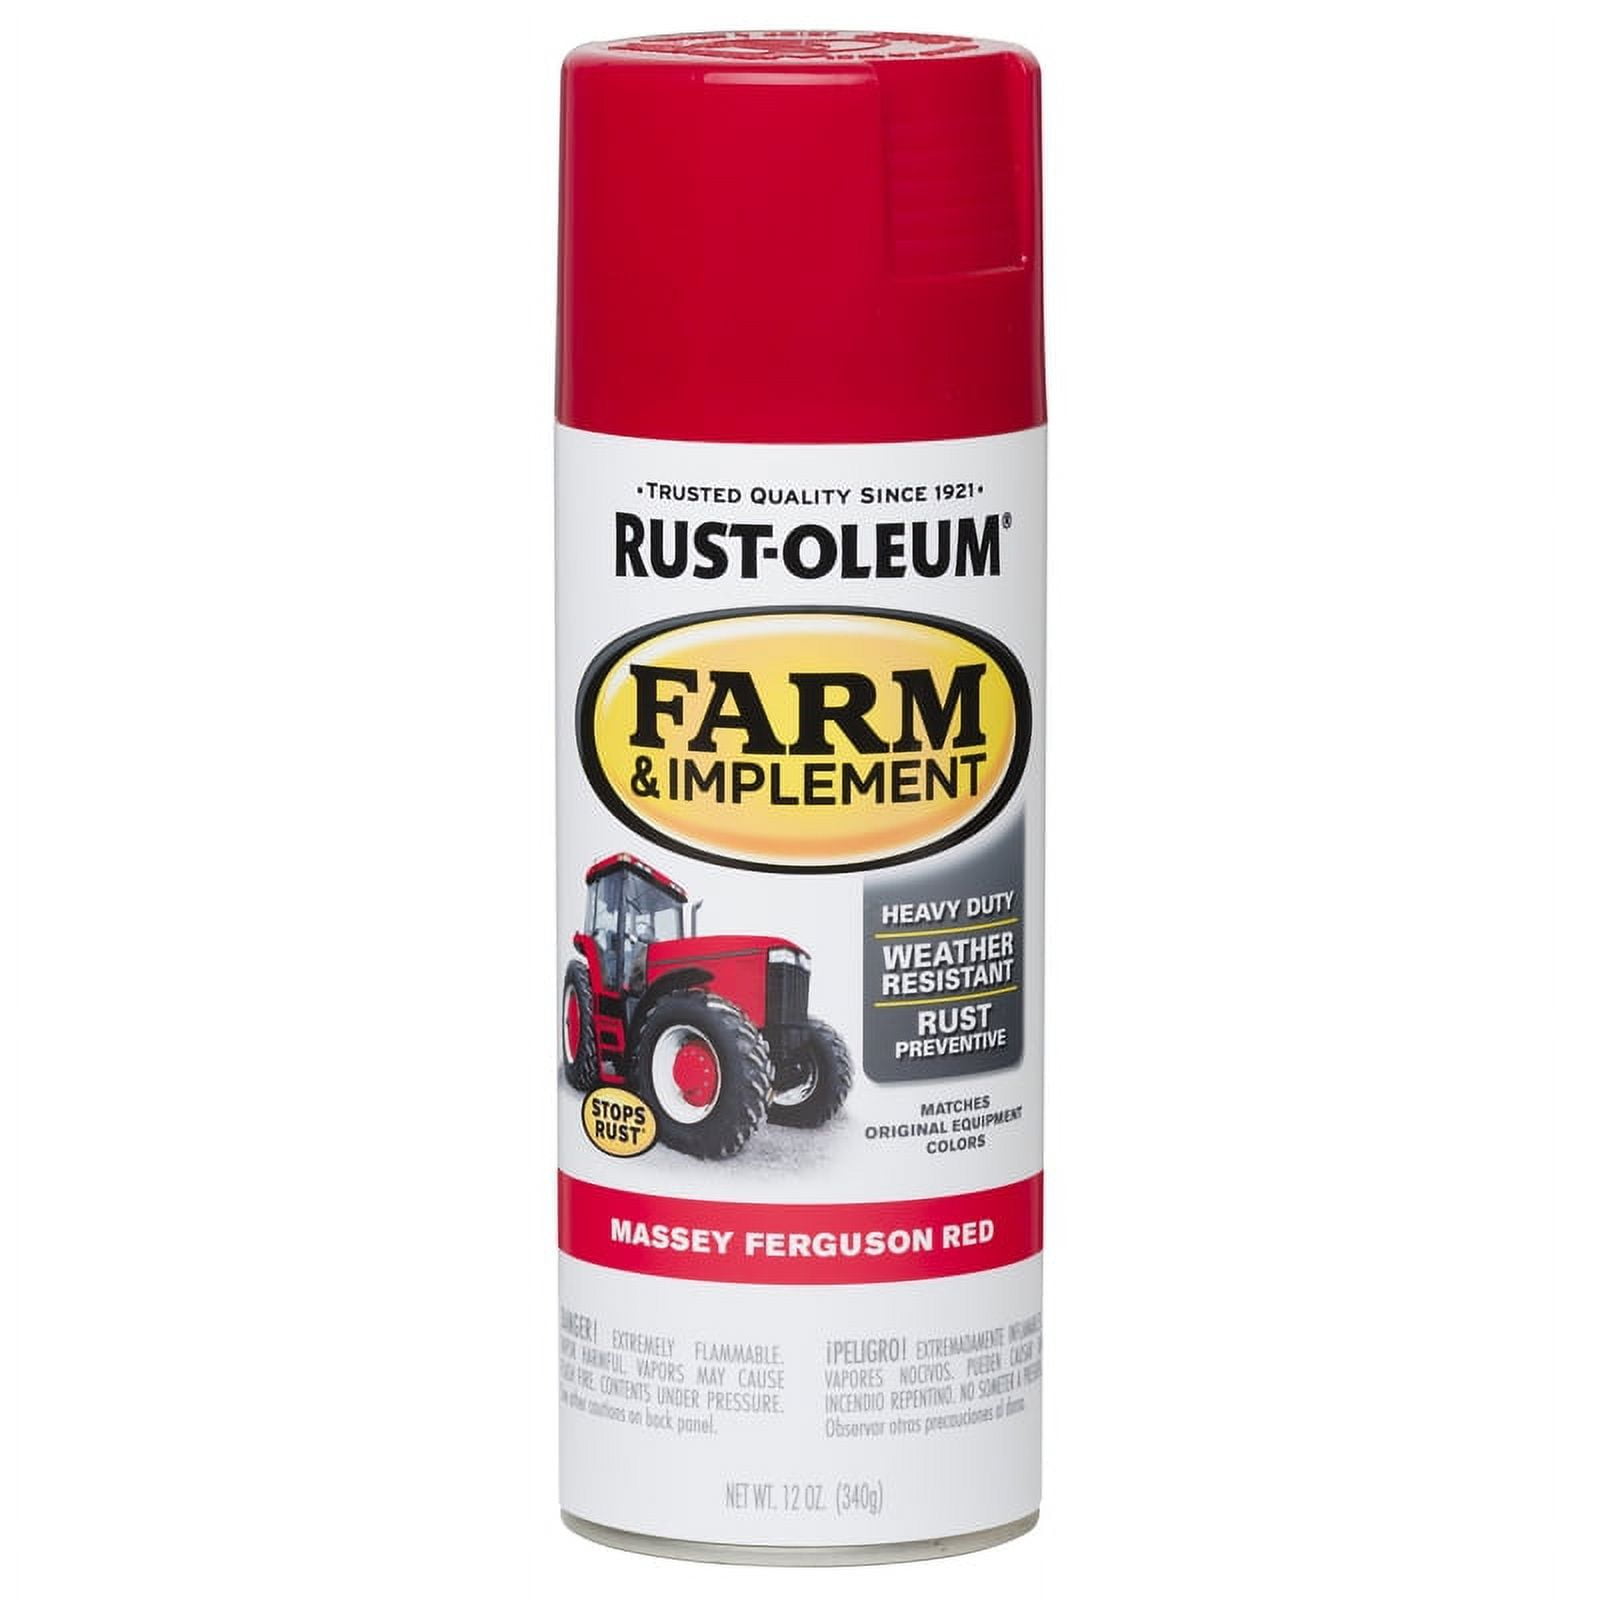 1001830 12 Oz Specialty Farm & Implement Gloss Massey Ferguson Red Rust Prevention Paint - Pack Of 6